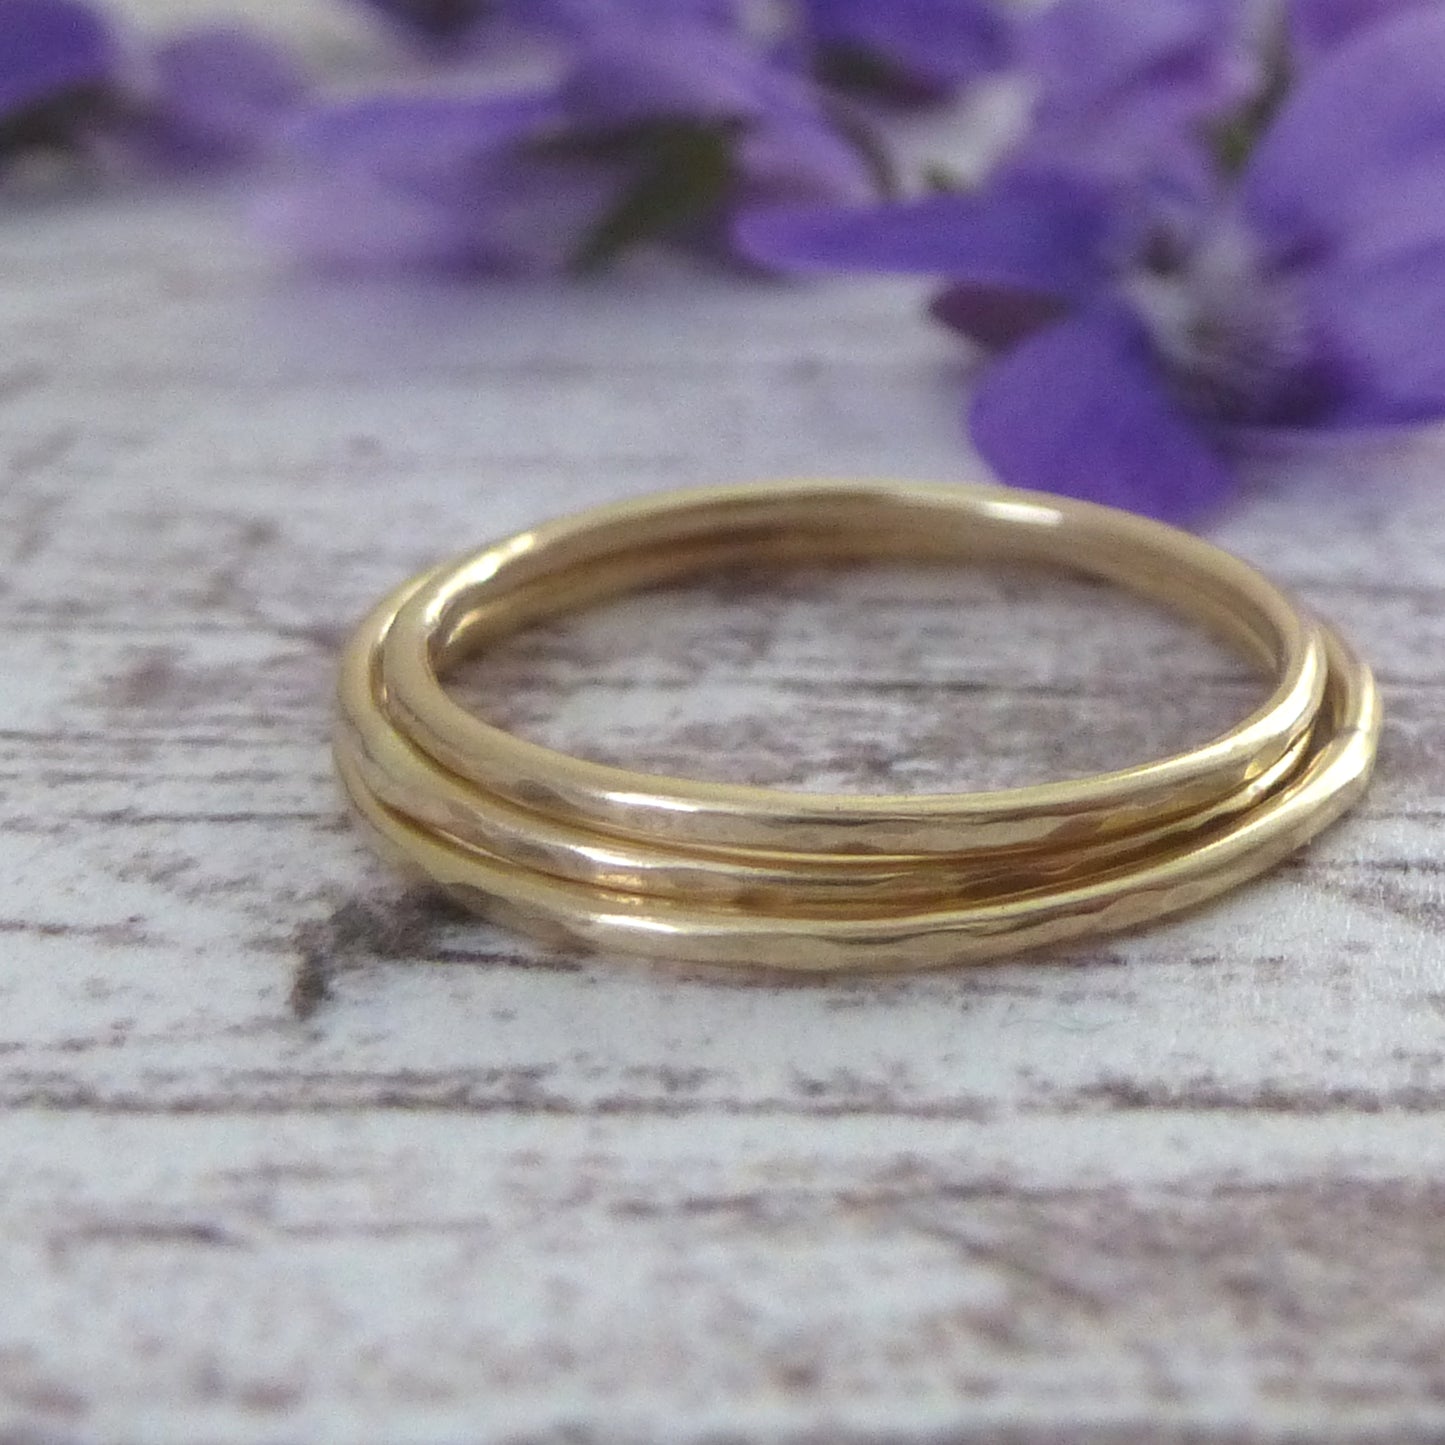 Skinny hammered band ring - 9ct yellow gold